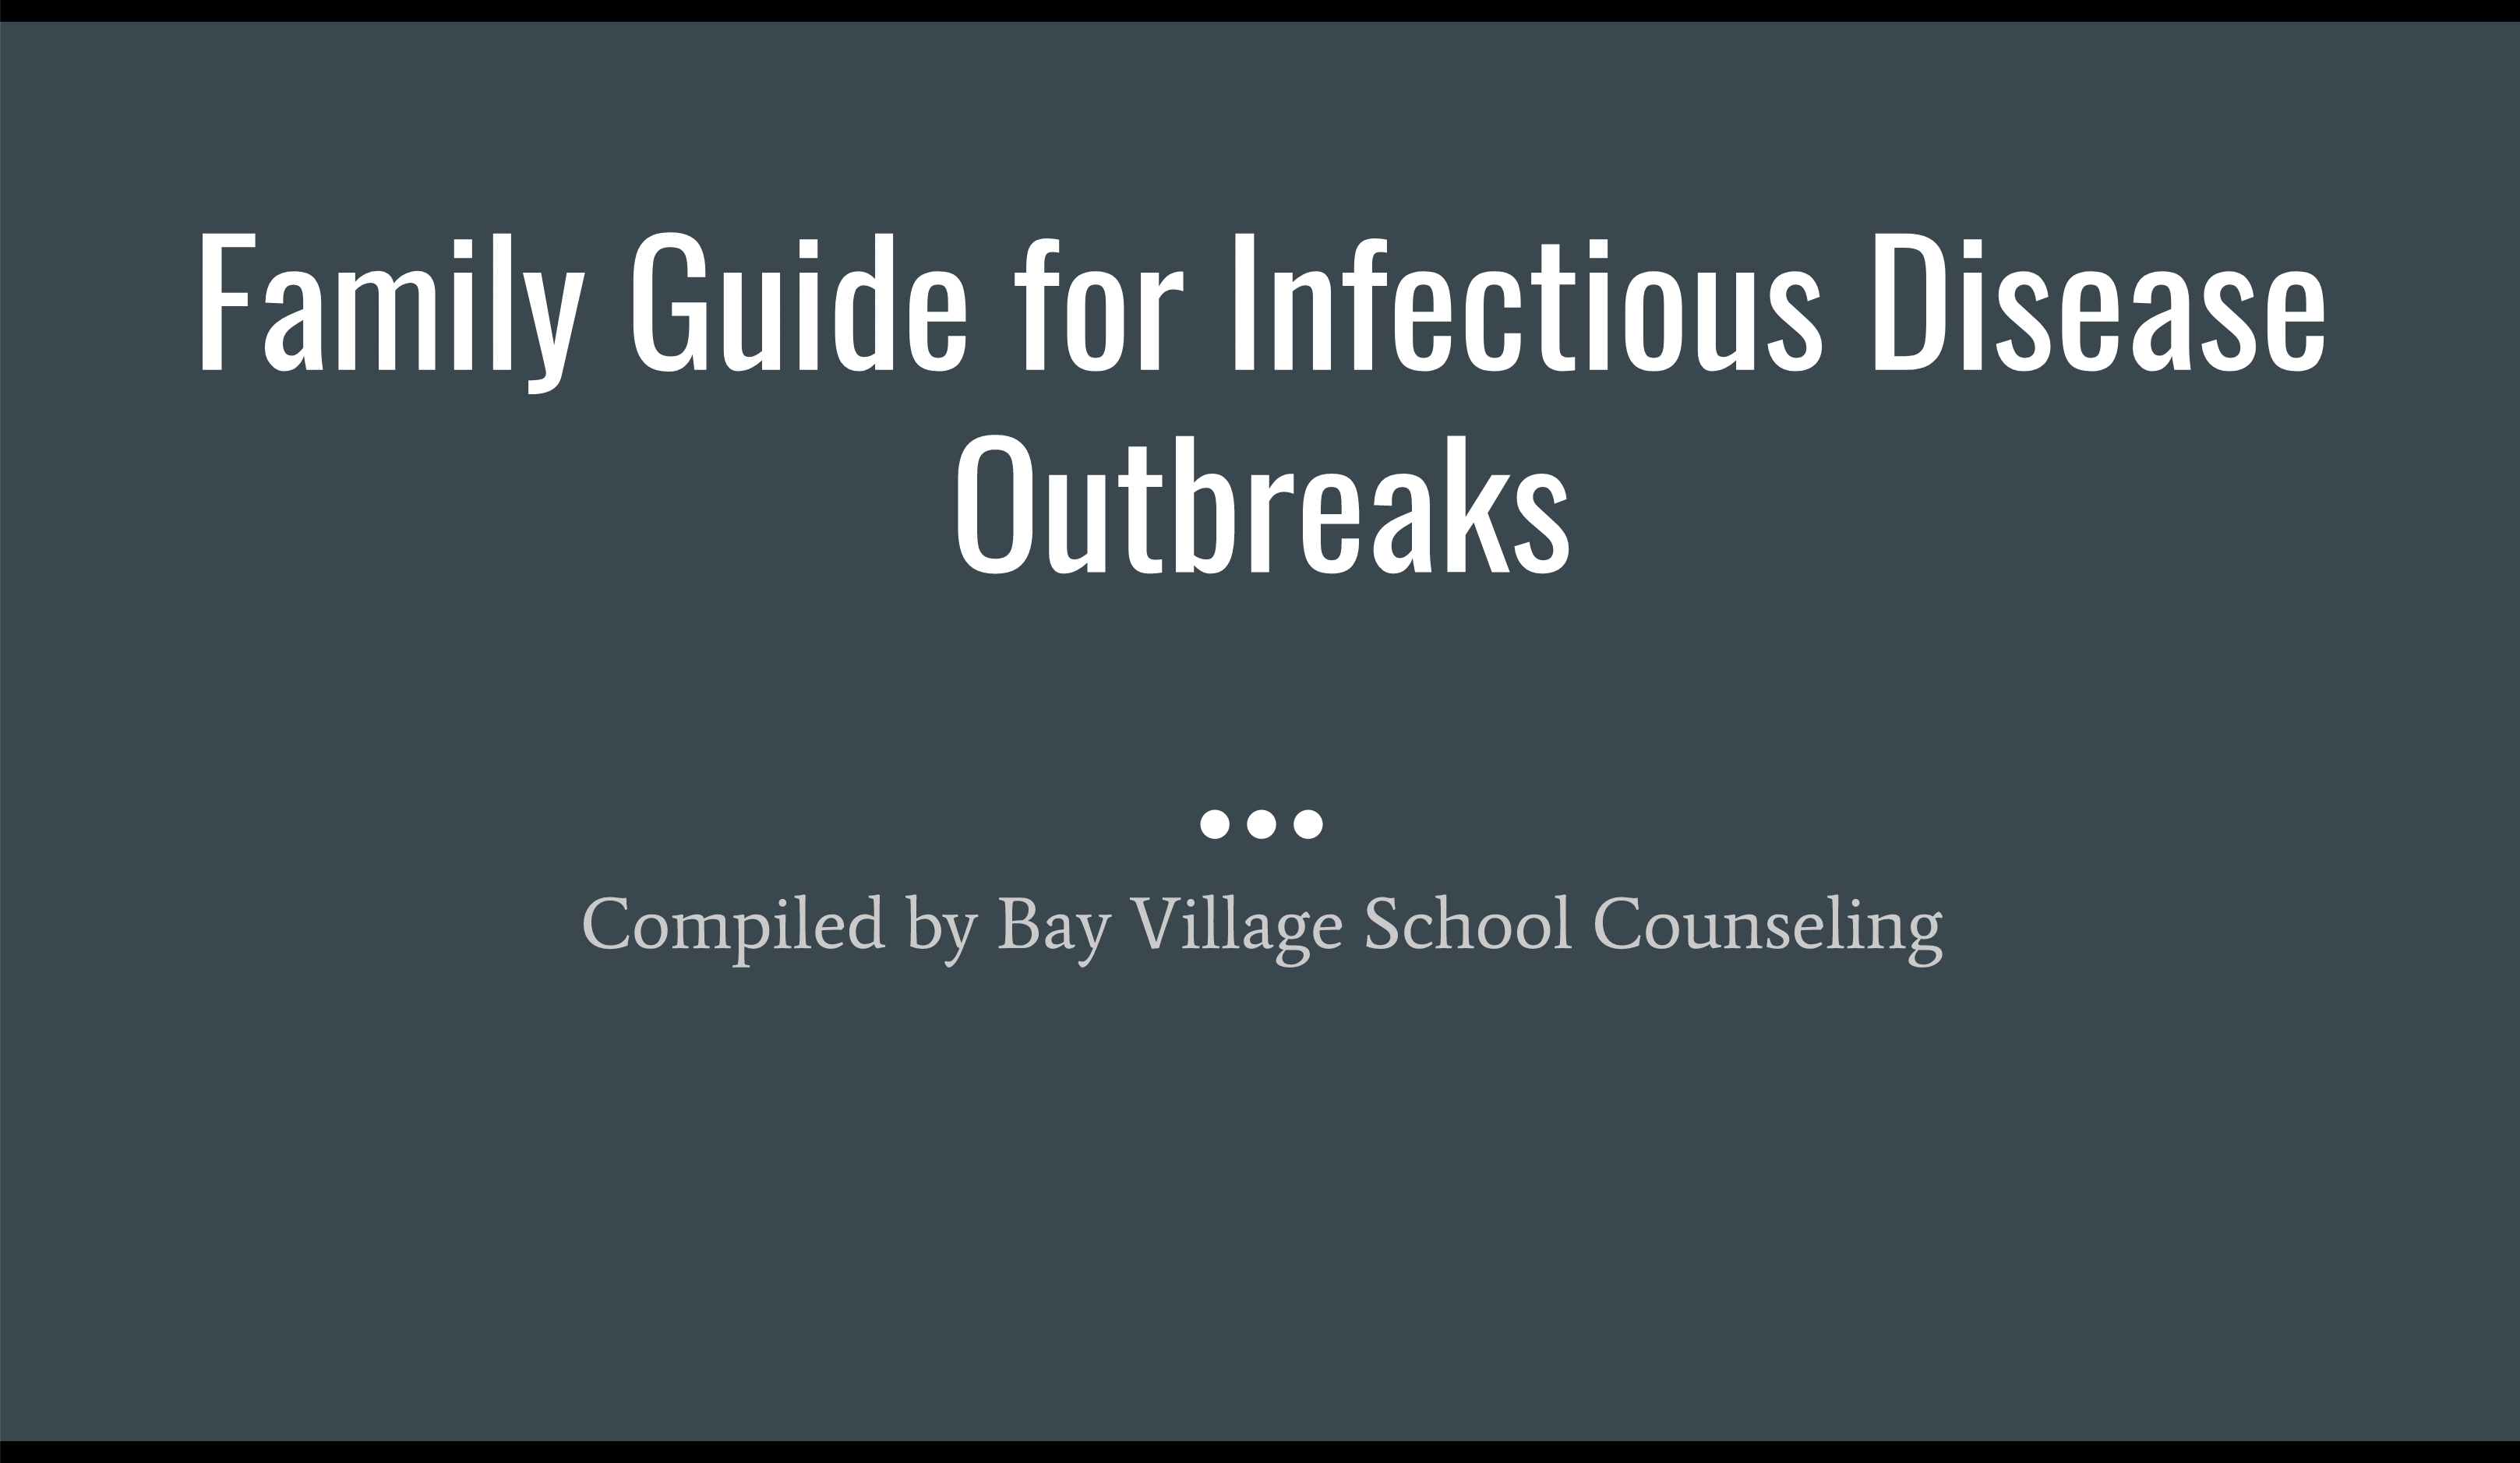 Family Guide for Infectious Disease Outbreaks